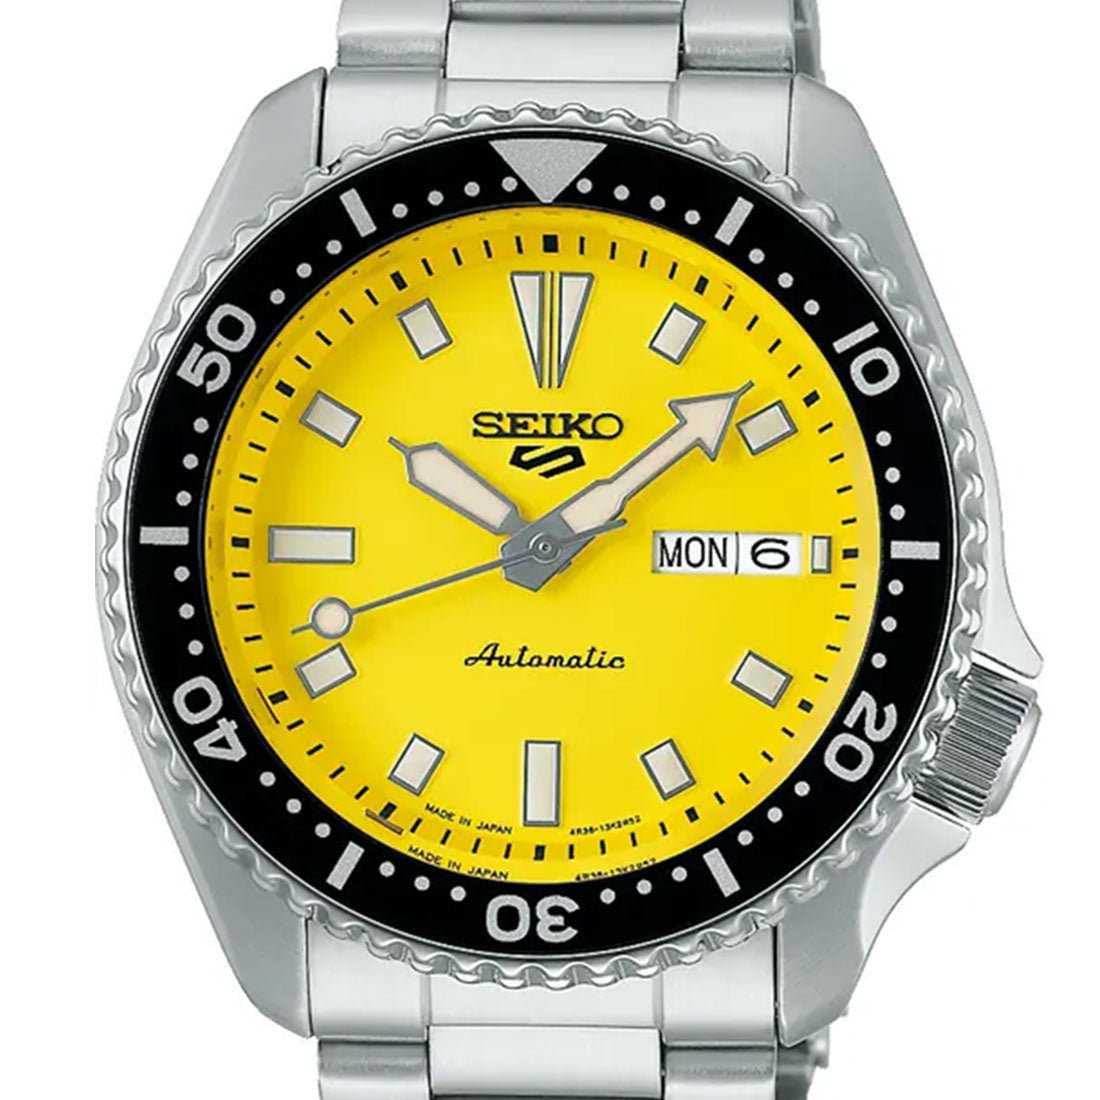 Seiko 5 Sports On Time Move SBSA193 Yellow Dial Limited Edition Mechanical Watch -Seiko